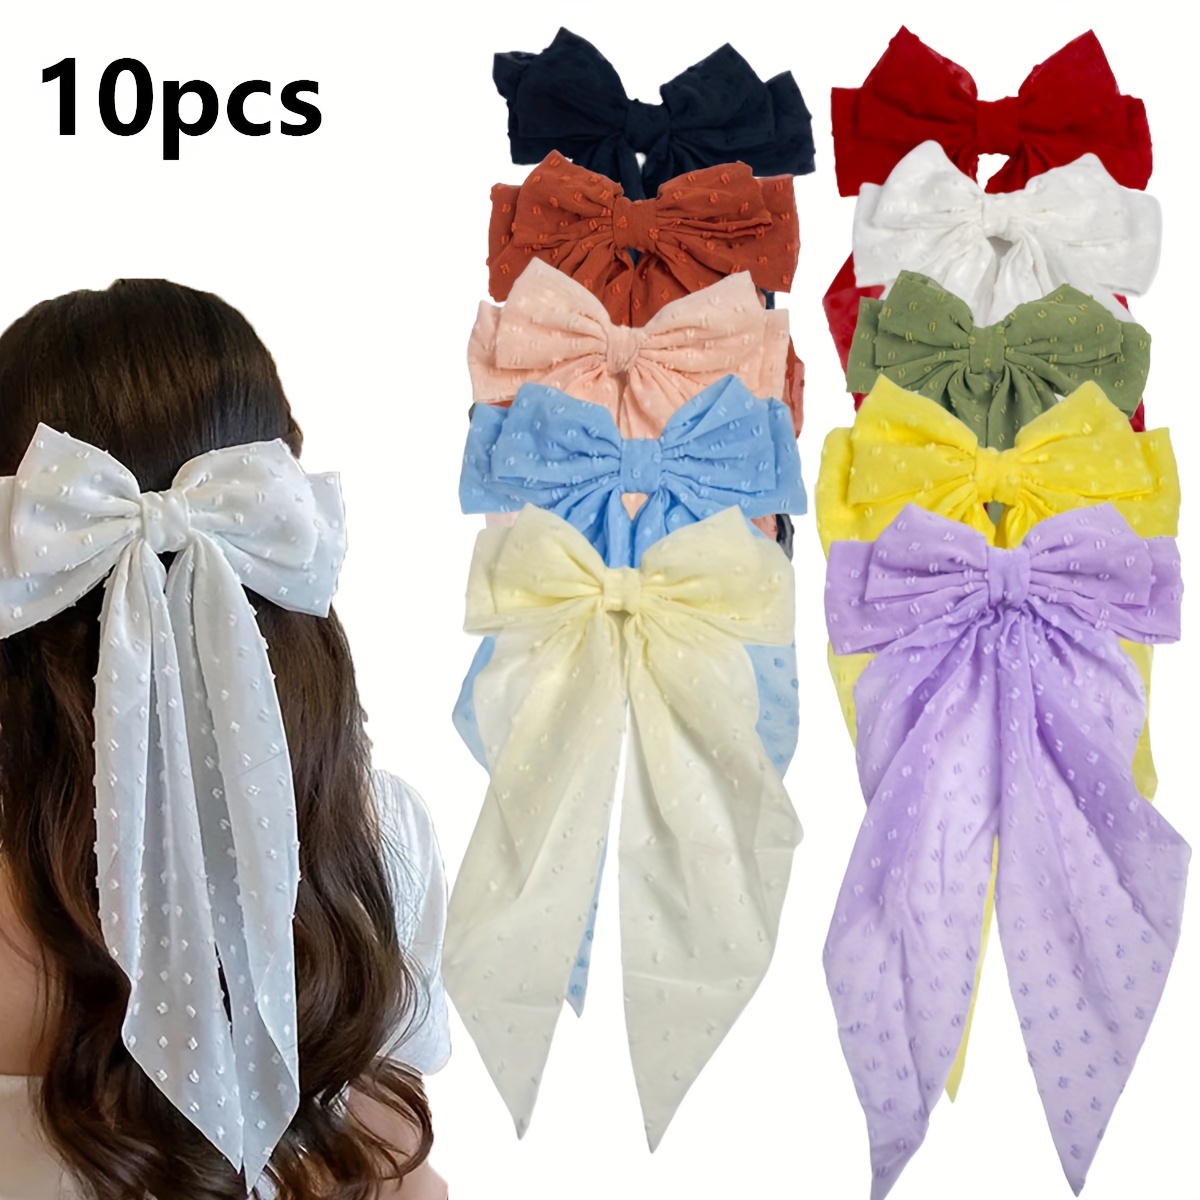 

10-piece Elegant Bow Hair Clips Set For Women - Oversized, Long Tail Design In Beige, Light Pink, White, Black | Boho Chic Fabric Barrettes Hair Accessories For Women Hair Ties For Women